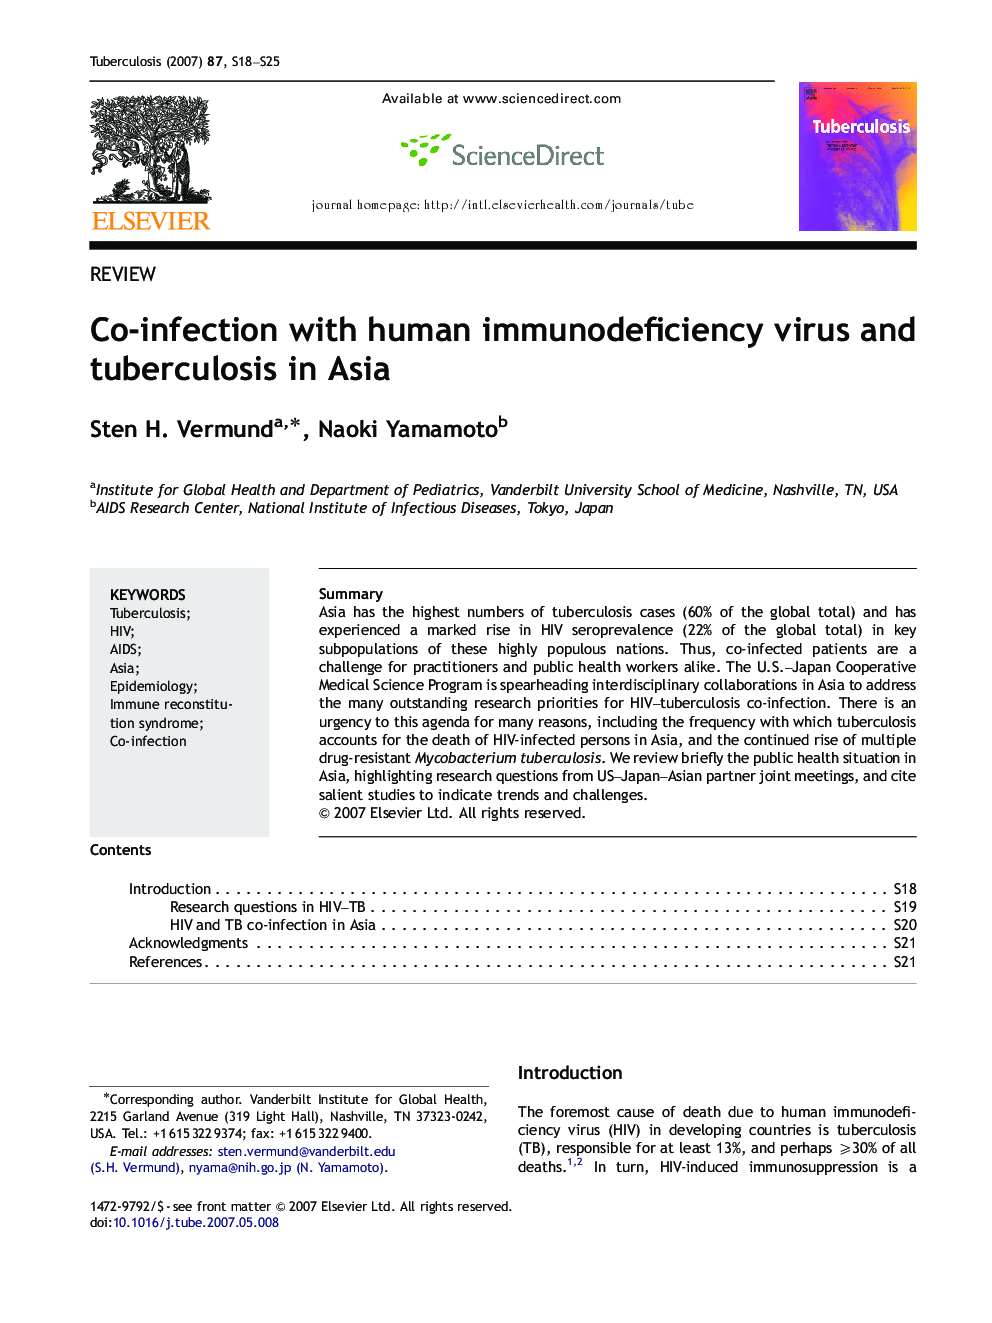 Co-infection with human immunodeficiency virus and tuberculosis in Asia